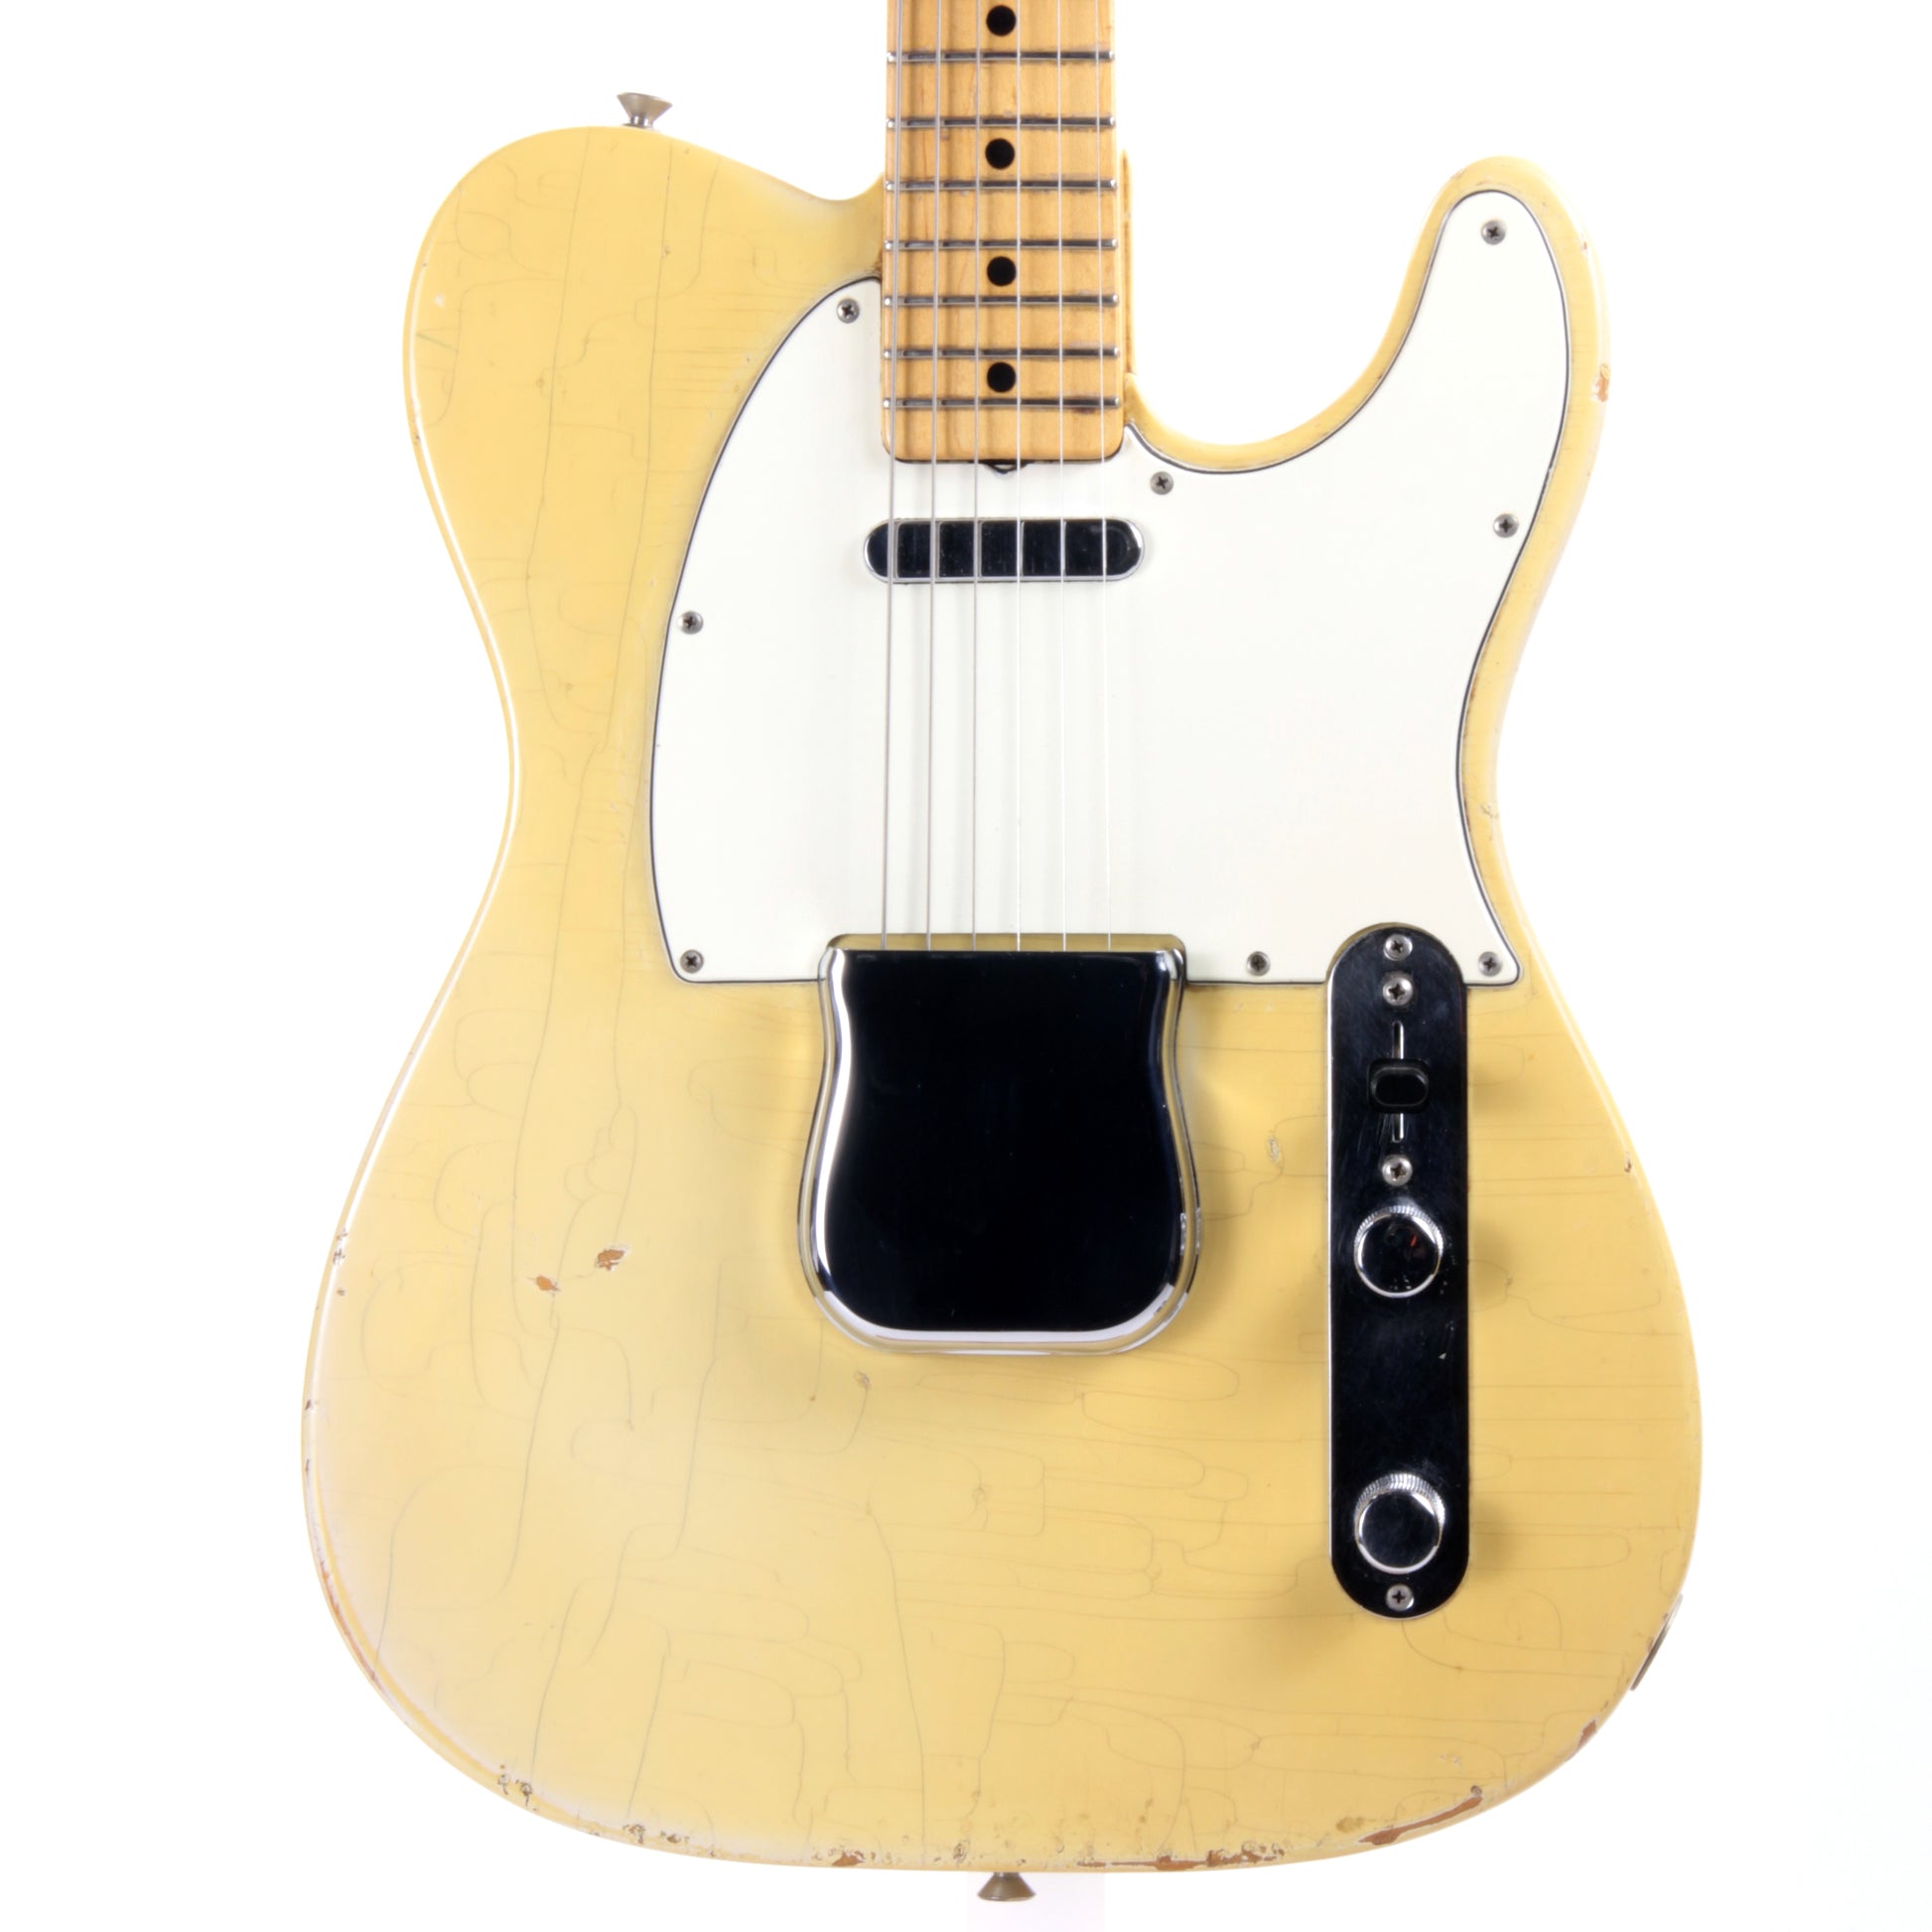 1960's Fender Telecaster in Blonde with white pickguard